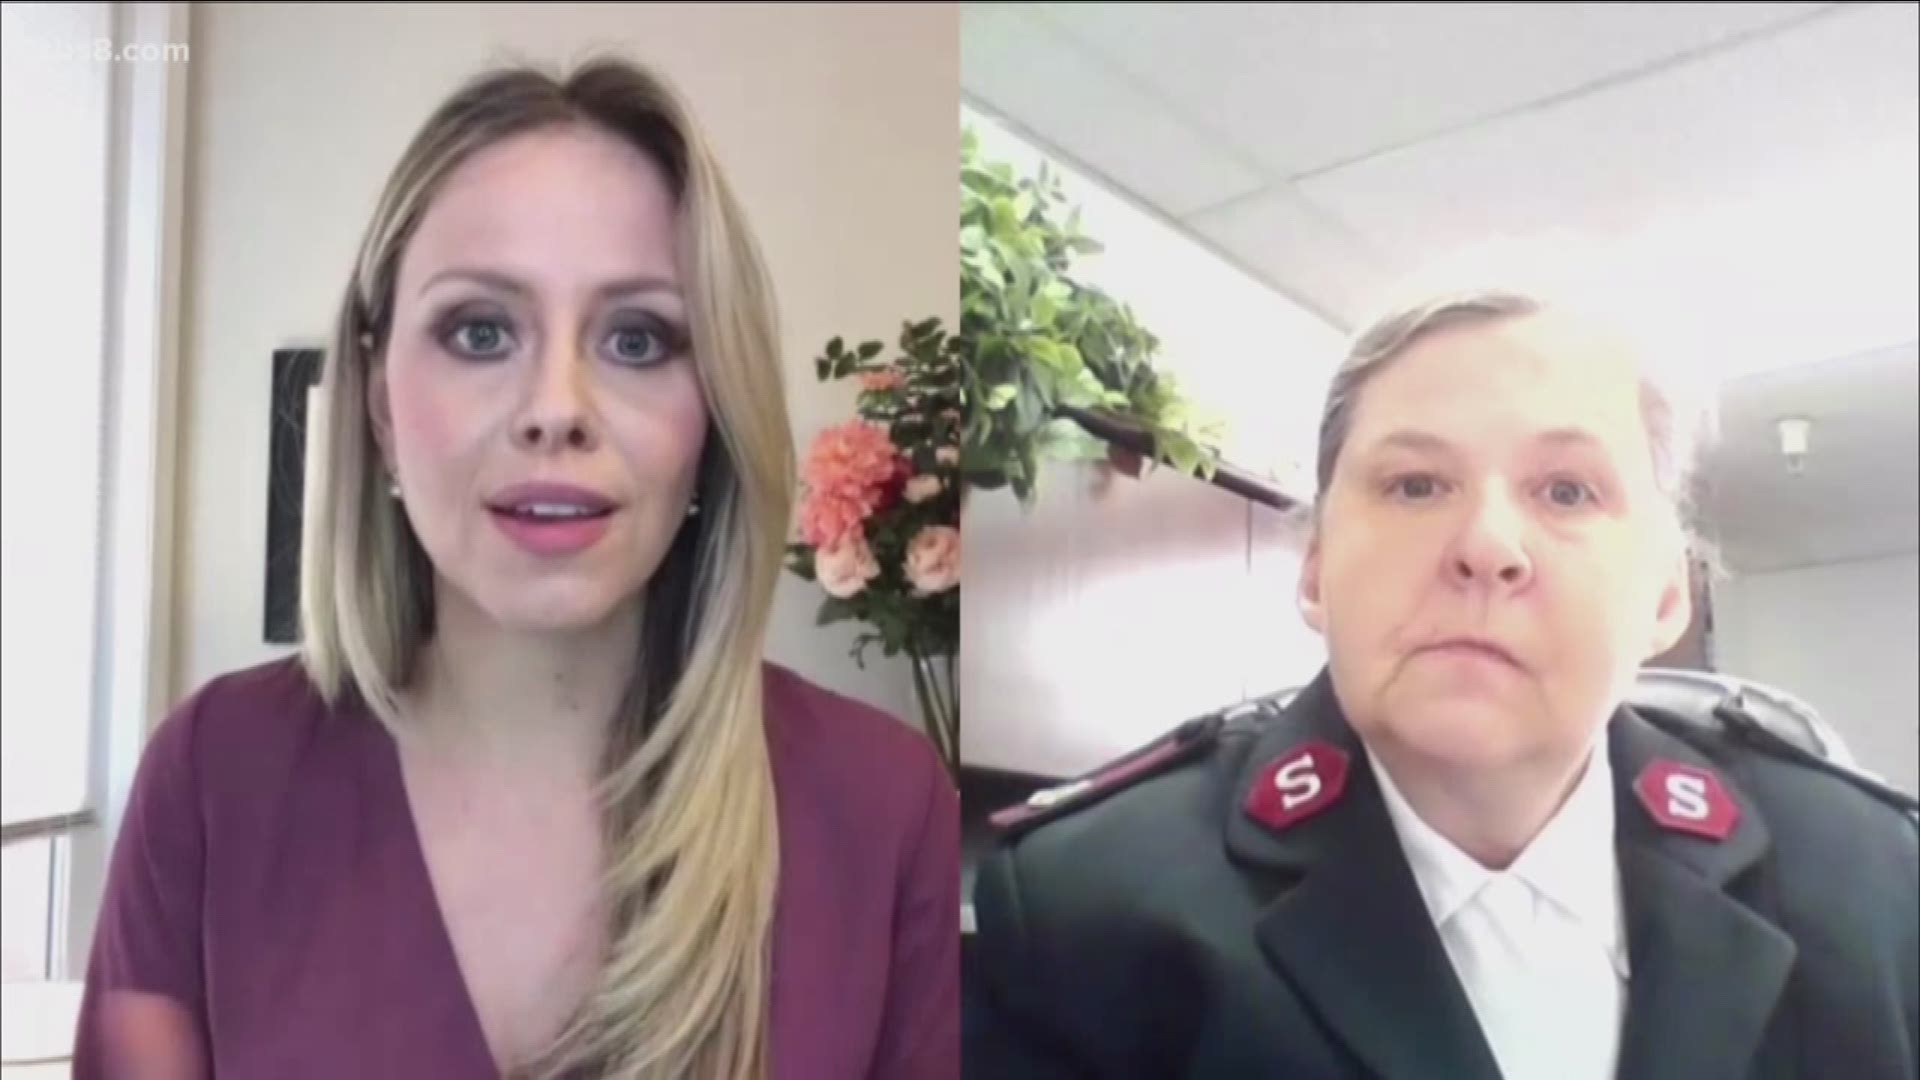 Major Iva West joined Morning Extra to talk about what The Salvation Army does and she talks about the importance of donations during this incredibly difficult time.